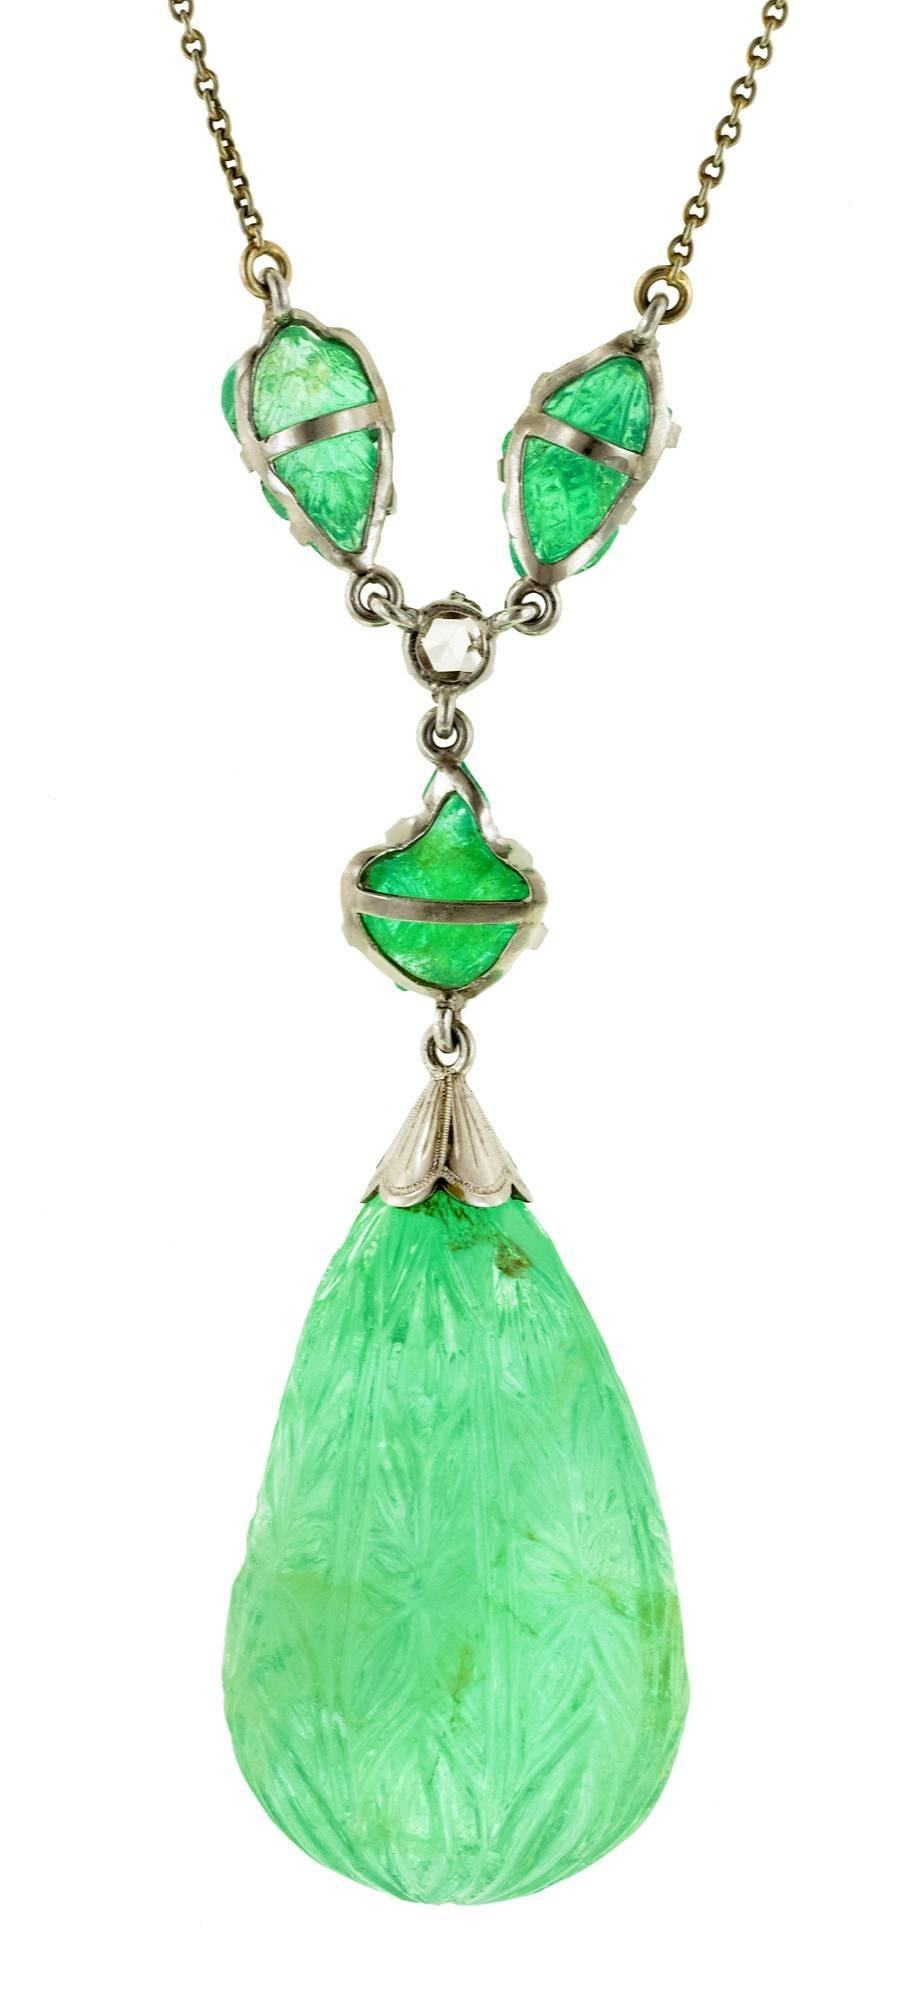 Art Deco carved emerald & diamond lavaliere necklace measuring 18 inches in overall length; featuring a carved emerald drop pendant measuring approx. 29 x 19.5mm (at widest), weighing approx. 32.50ct; with a foliate motif. Suspended by three carved